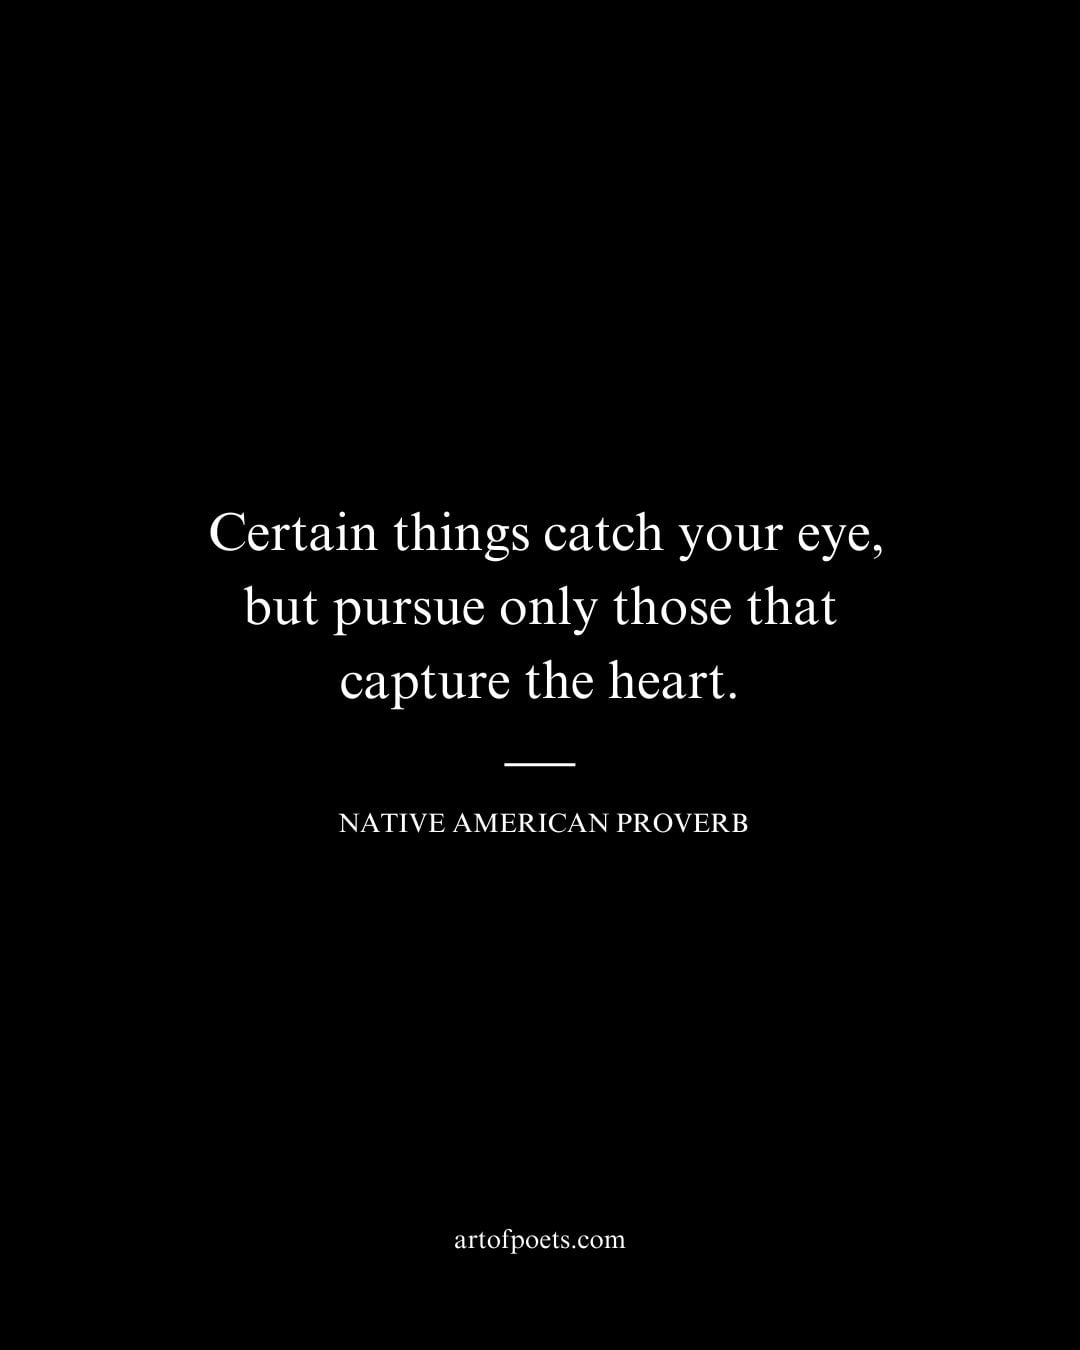 Certain things catch your eye but pursue only those that capture the heart